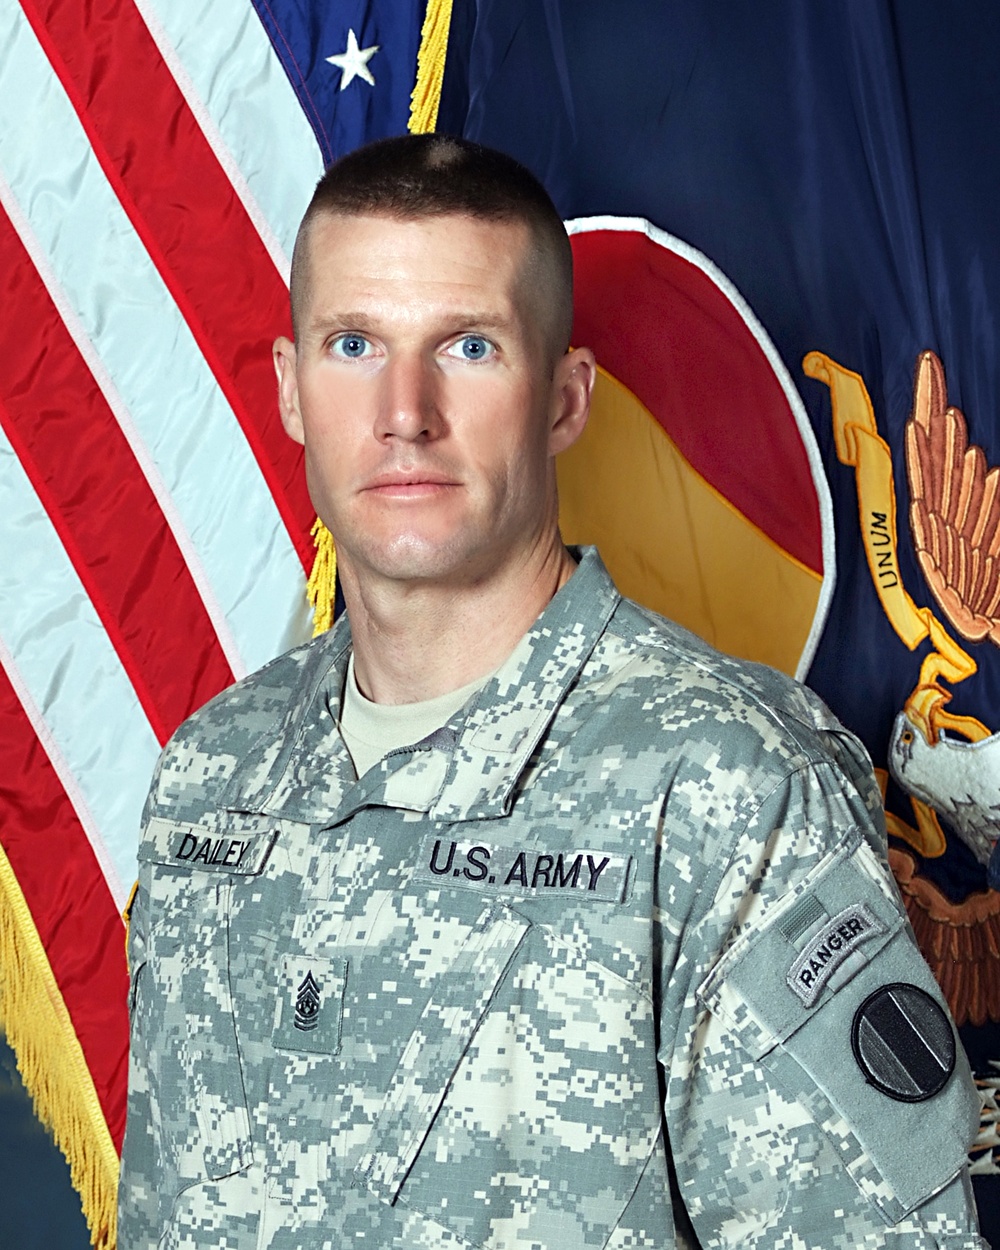 Command Sgt. Maj. Daniel A. Dailey selected to be next  Sergeant Major of the Army